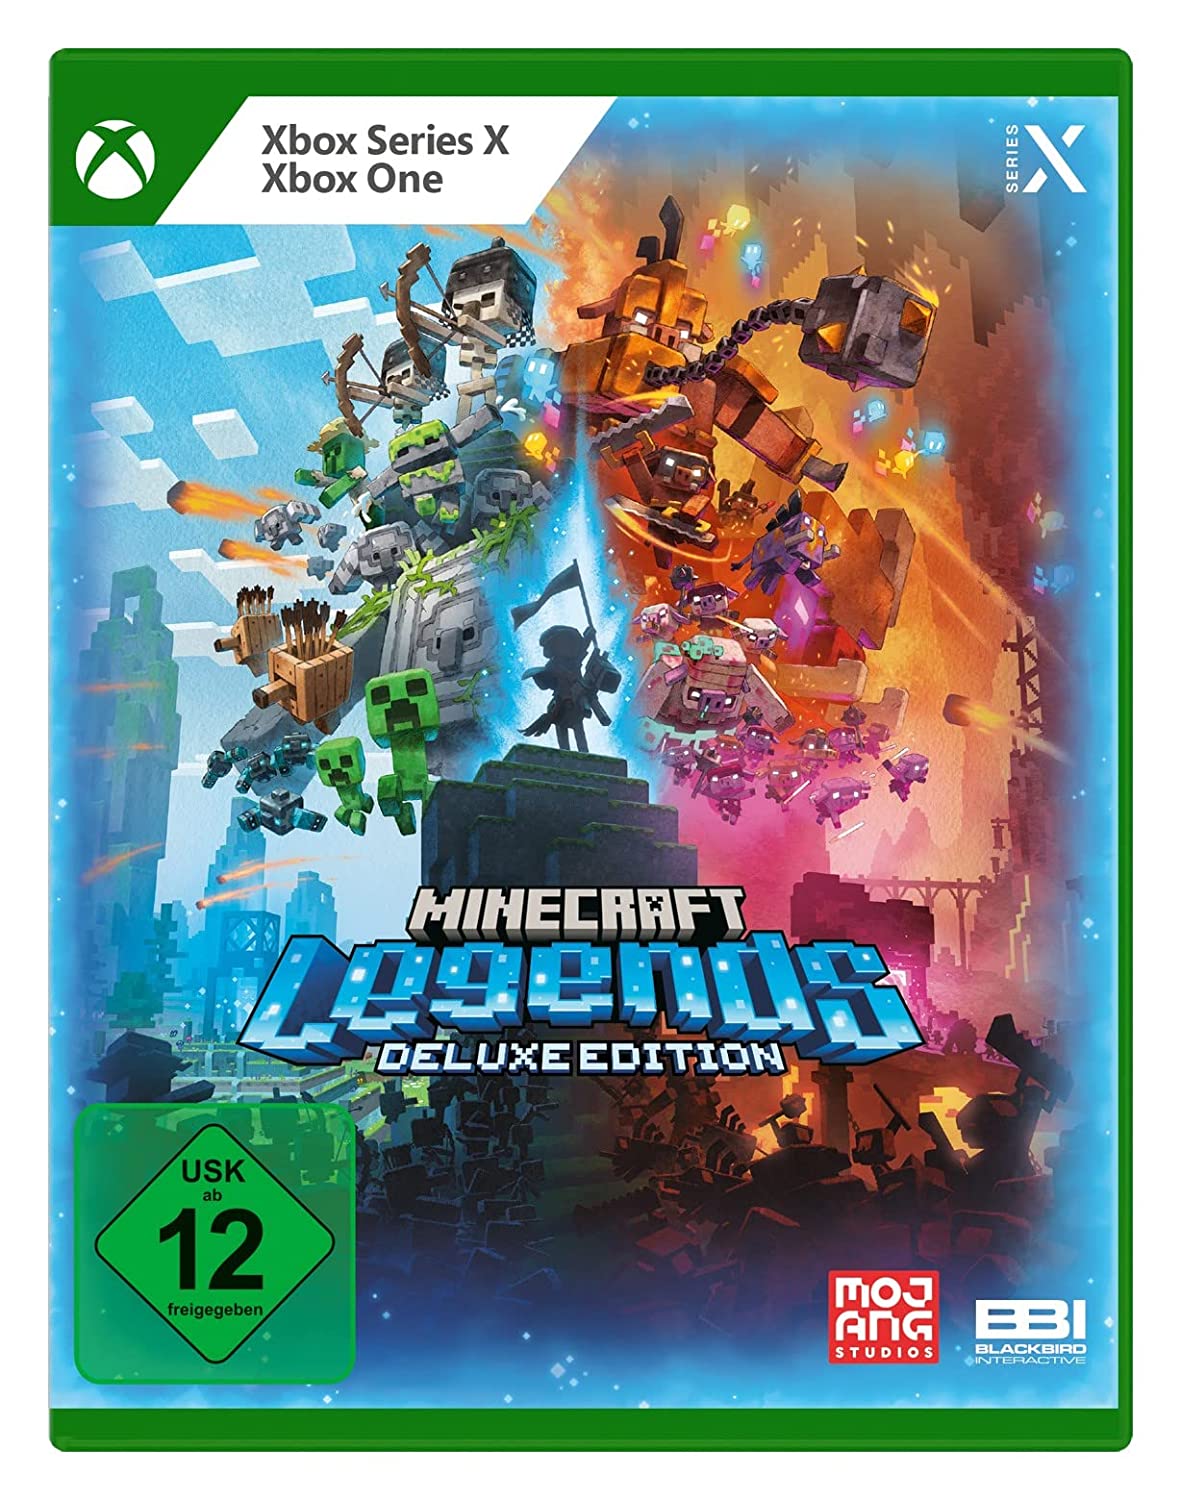 Minecraft Legends - Deluxe Edition (Disc) - [Xbox One/Series X]